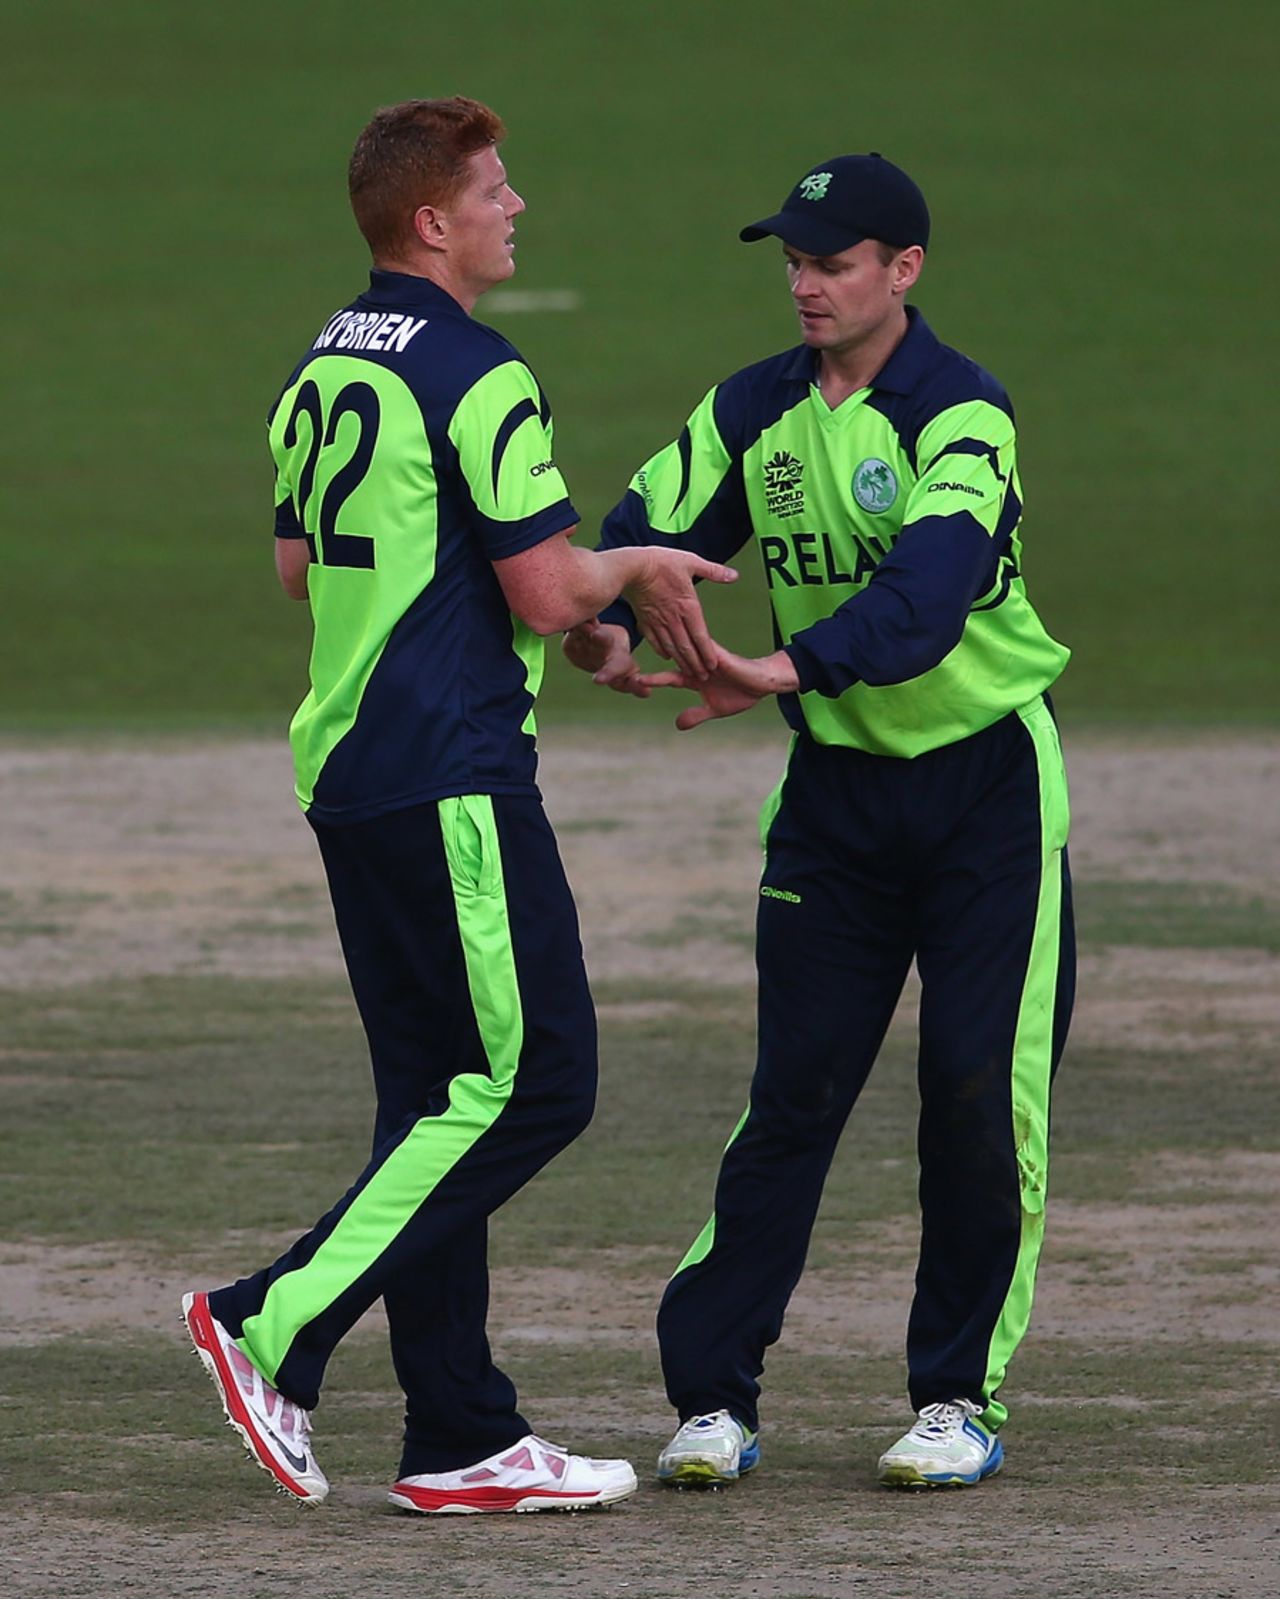 Kevin O'Brien is congratulated by William Porterfield, Ireland v Zimbabwe, World T20 warm-ups, Dharamsala, March 5, 2016